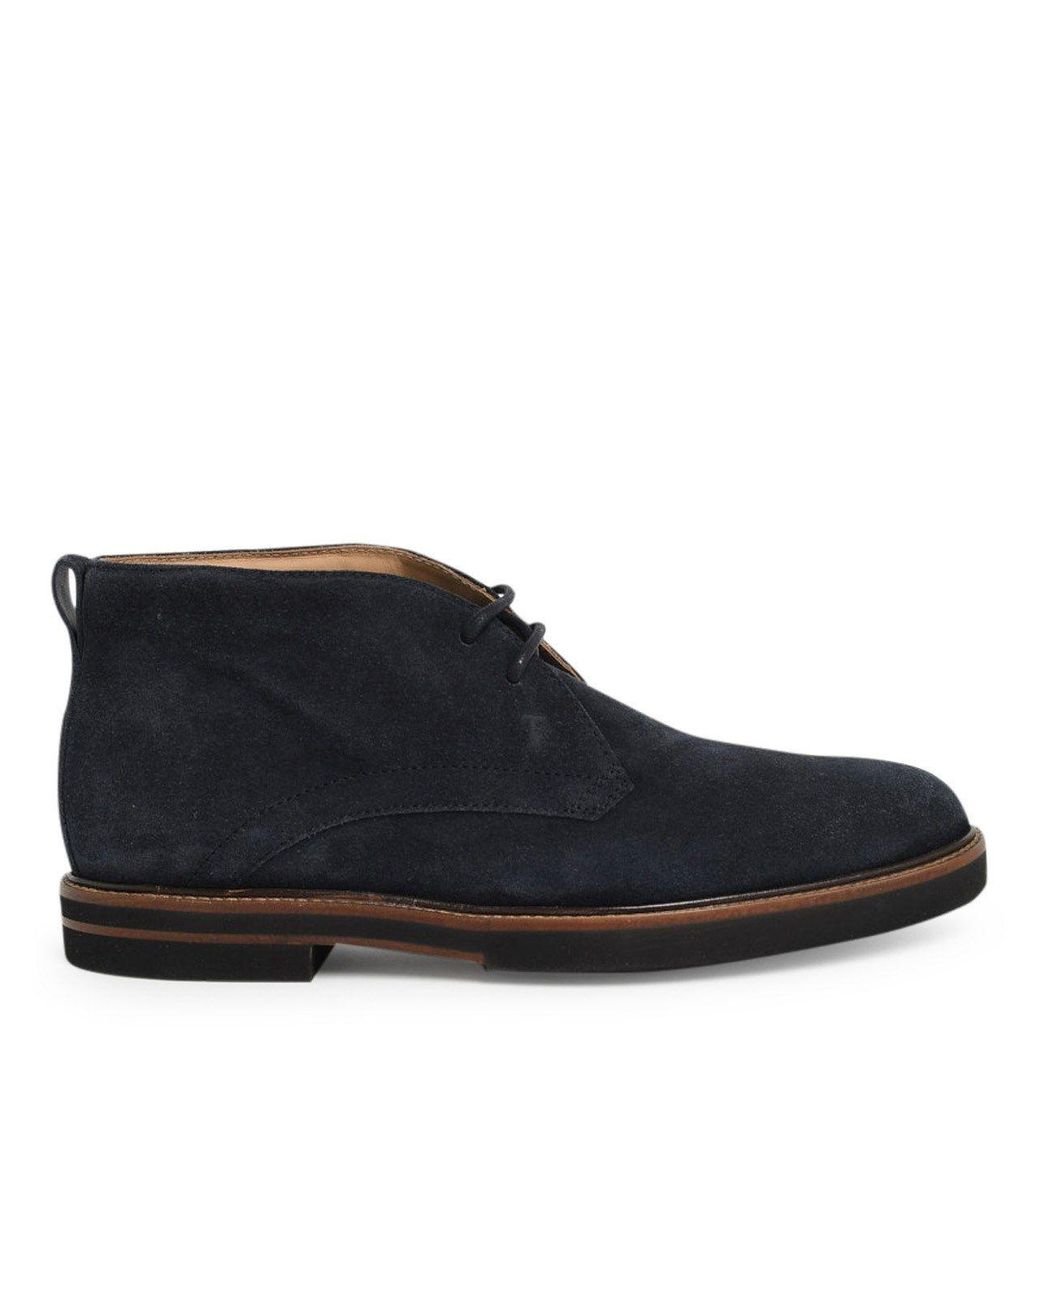 Tod's Suede Ankle Boots in Blue for Men - Lyst